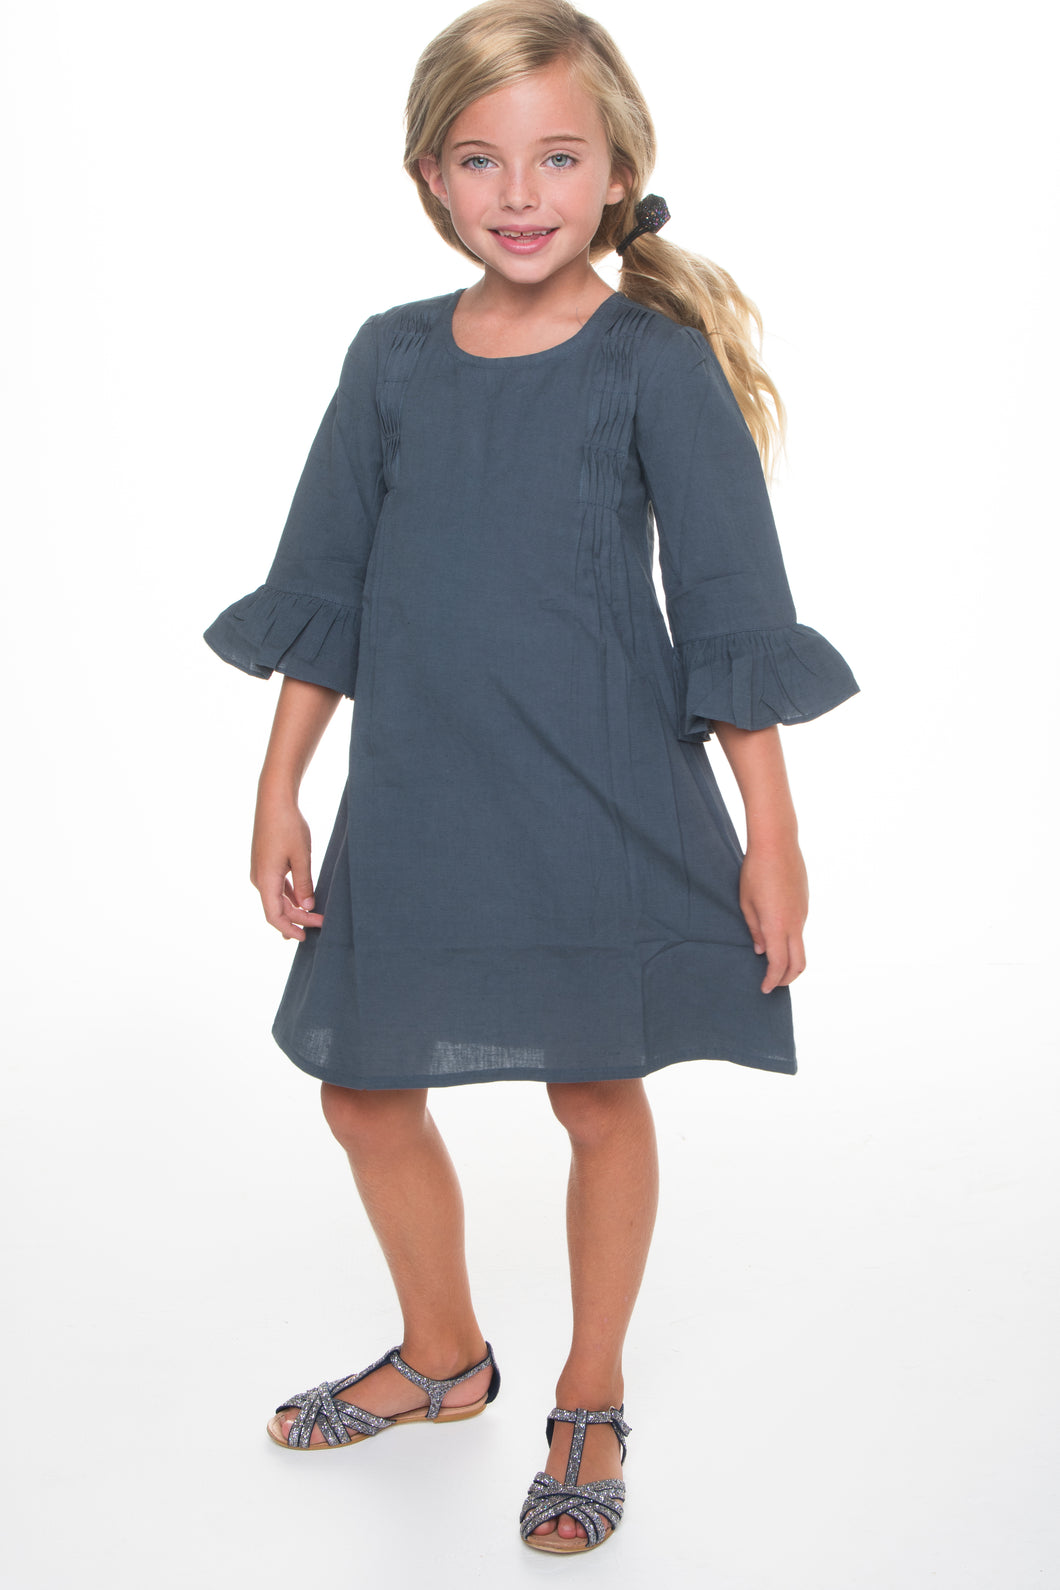 Grey Pin Tuck Detail Dress With Bell Sleeves - Kids Wholesale Boutique Clothing, Dress - Girls Dresses, Yo Baby Wholesale - Yo Baby